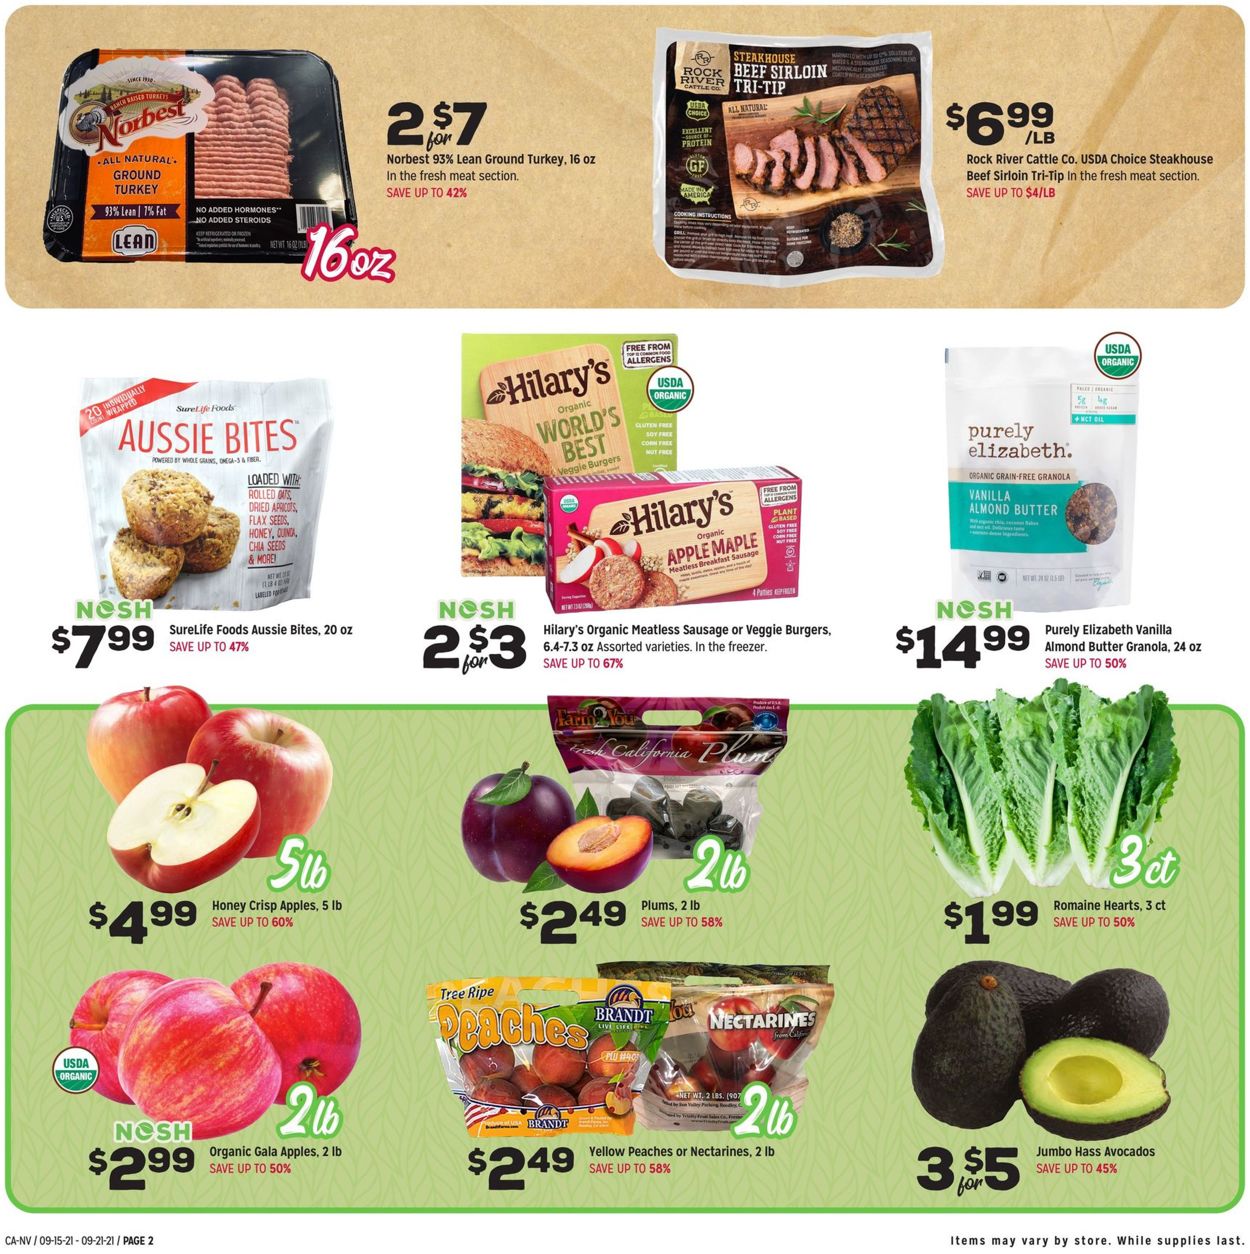 Grocery Outlet Weekly Ad Circular - valid 09/15-09/21/2021 (Page 2)